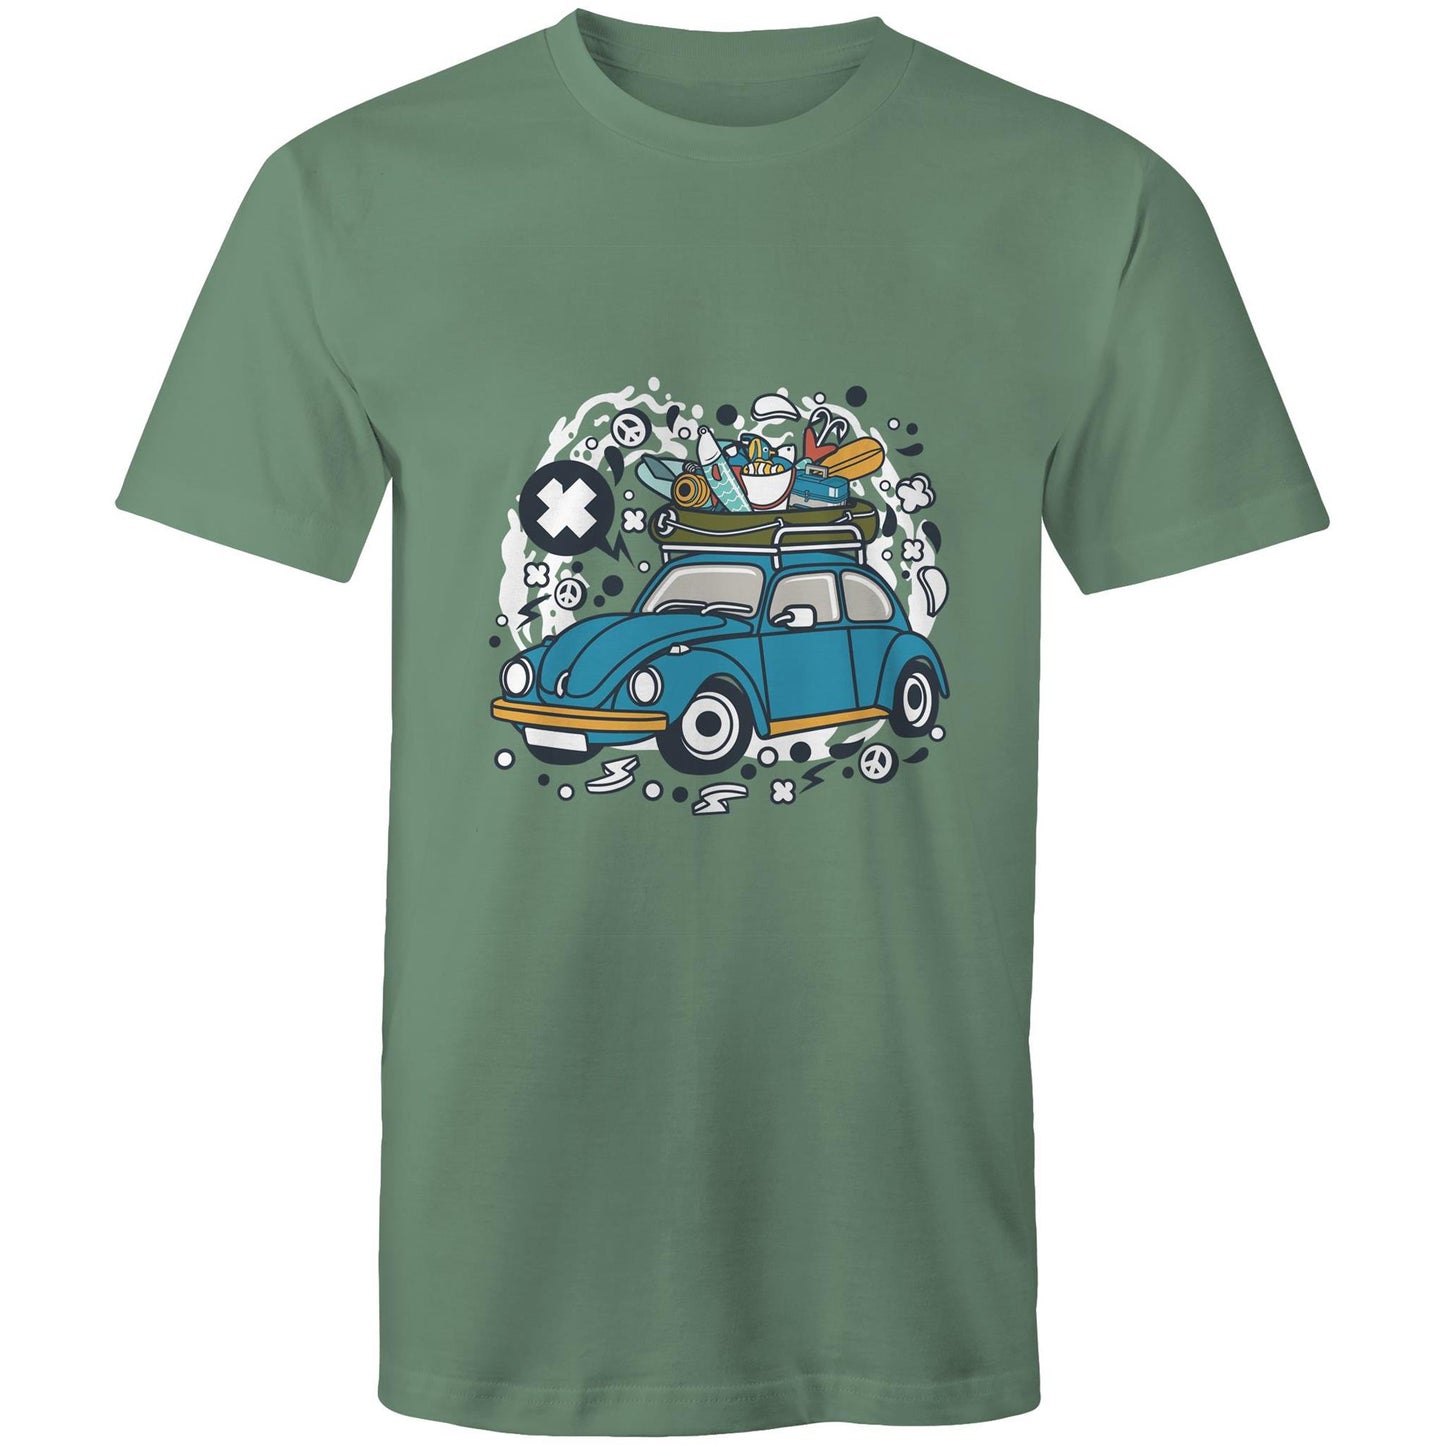 Going Fishing in Style - Mens T-Shirt